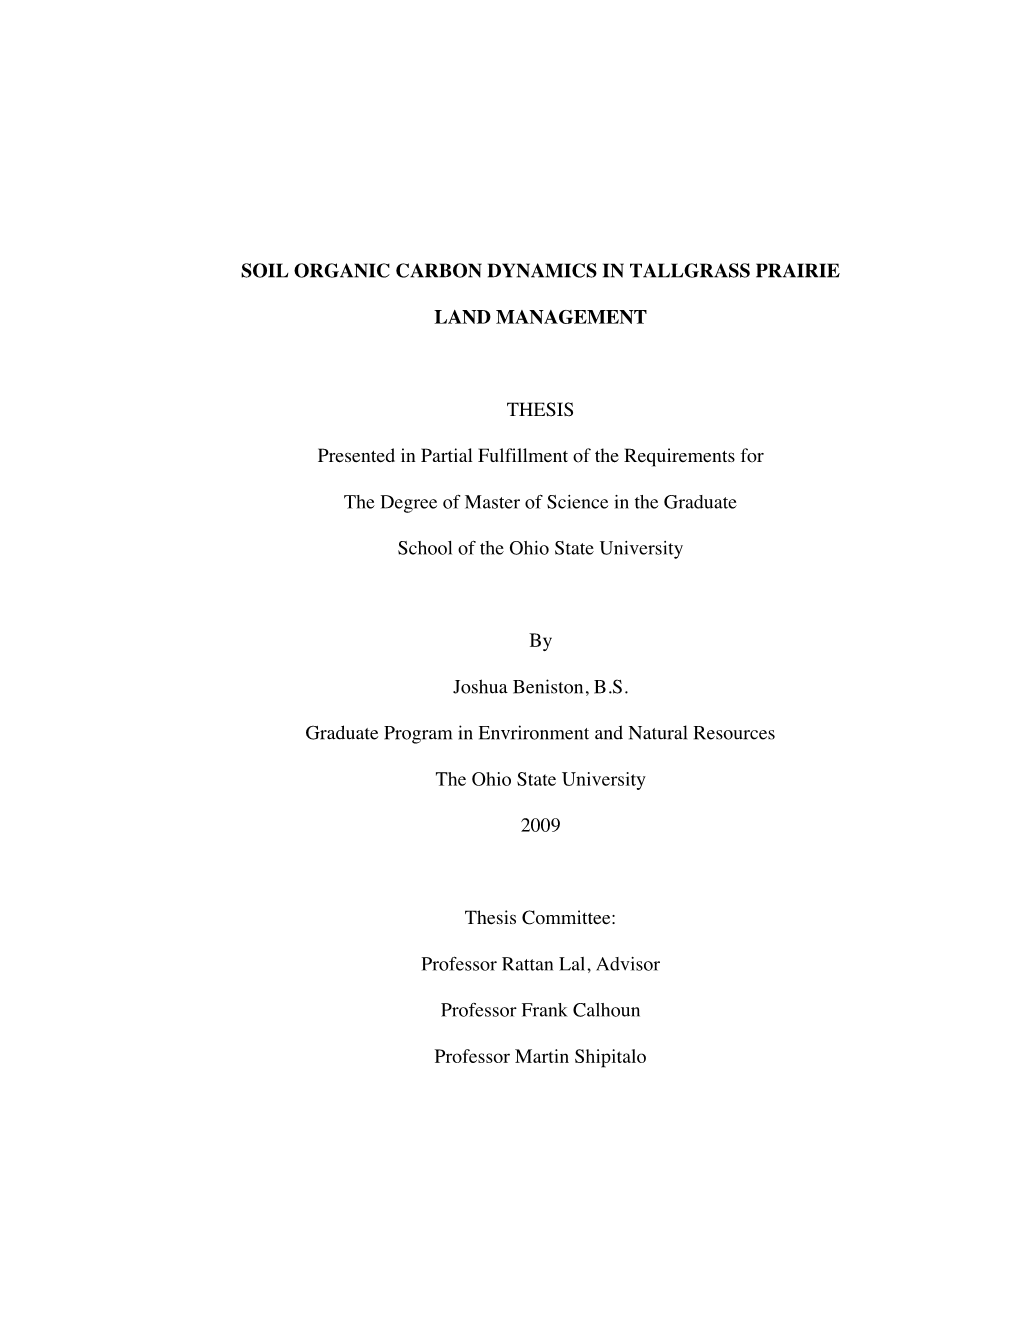 SOIL ORGANIC CARBON DYNAMICS in TALLGRASS PRAIRIE LAND MANAGEMENT THESIS Presented in Partial Fulfillment of the Requirements Fo